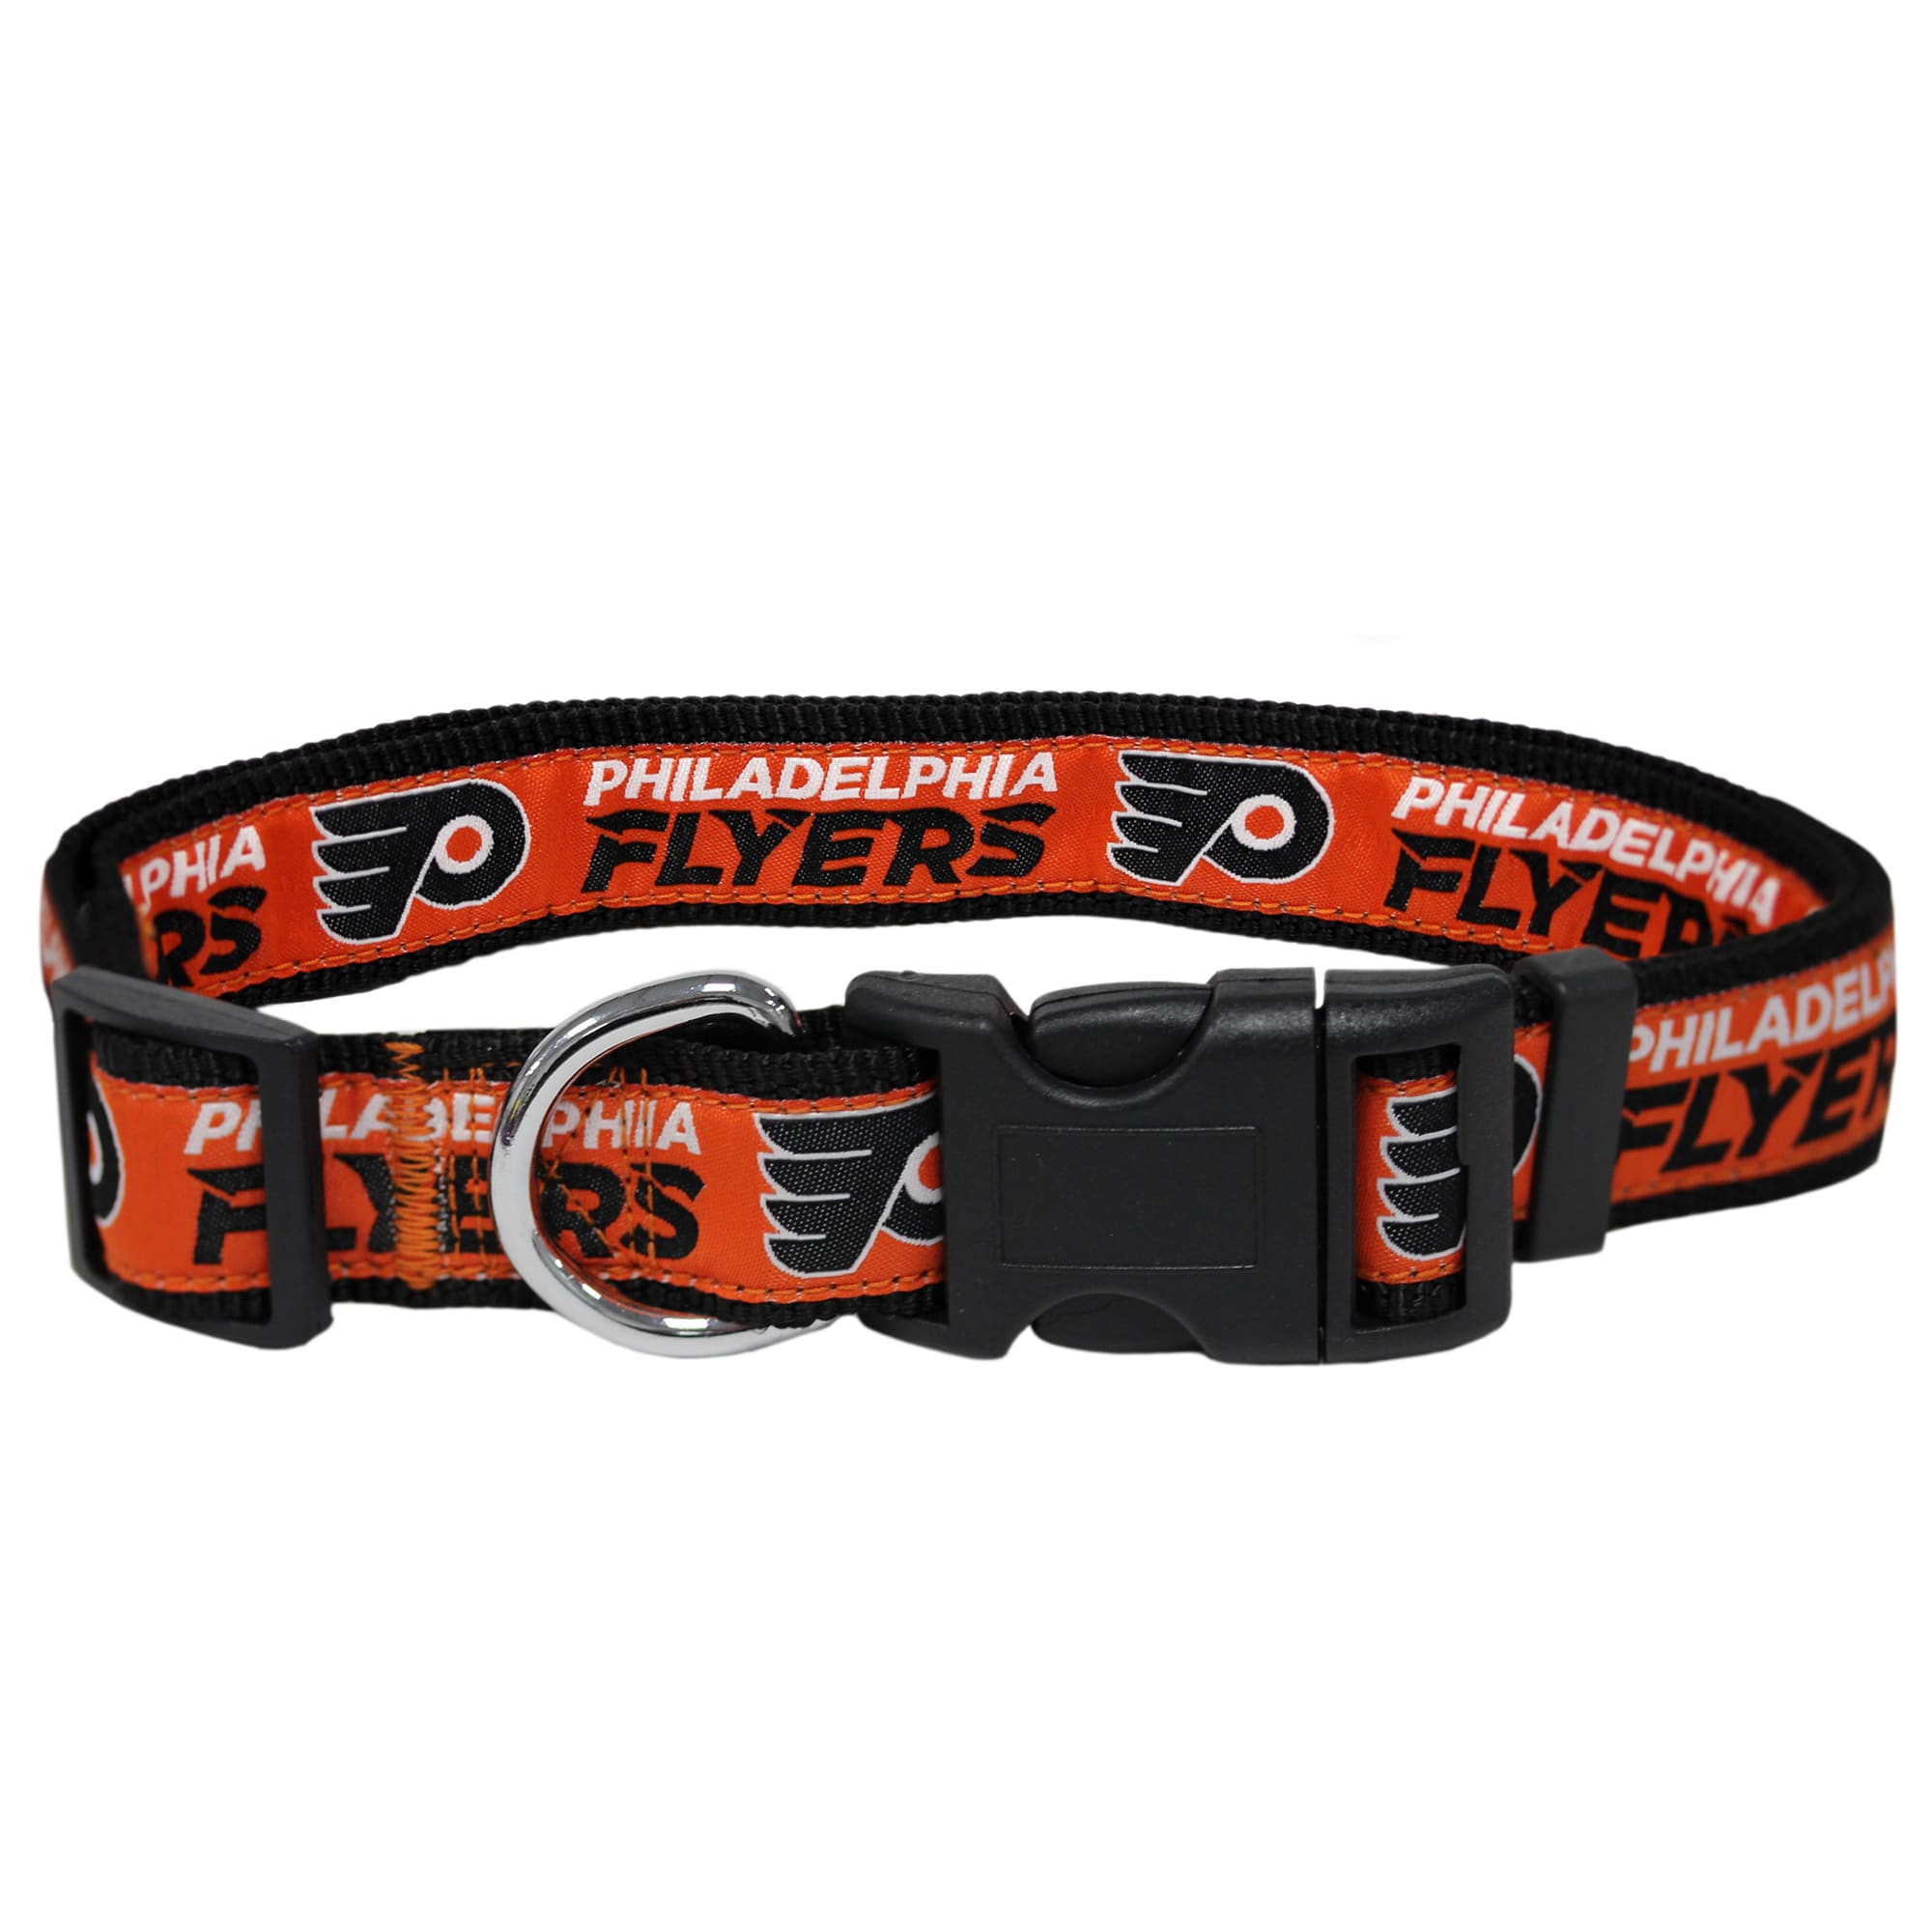 Photos - Collar / Harnesses Pets First Philadelphia Flyers Dog Collar, Large, Multi-Color F 